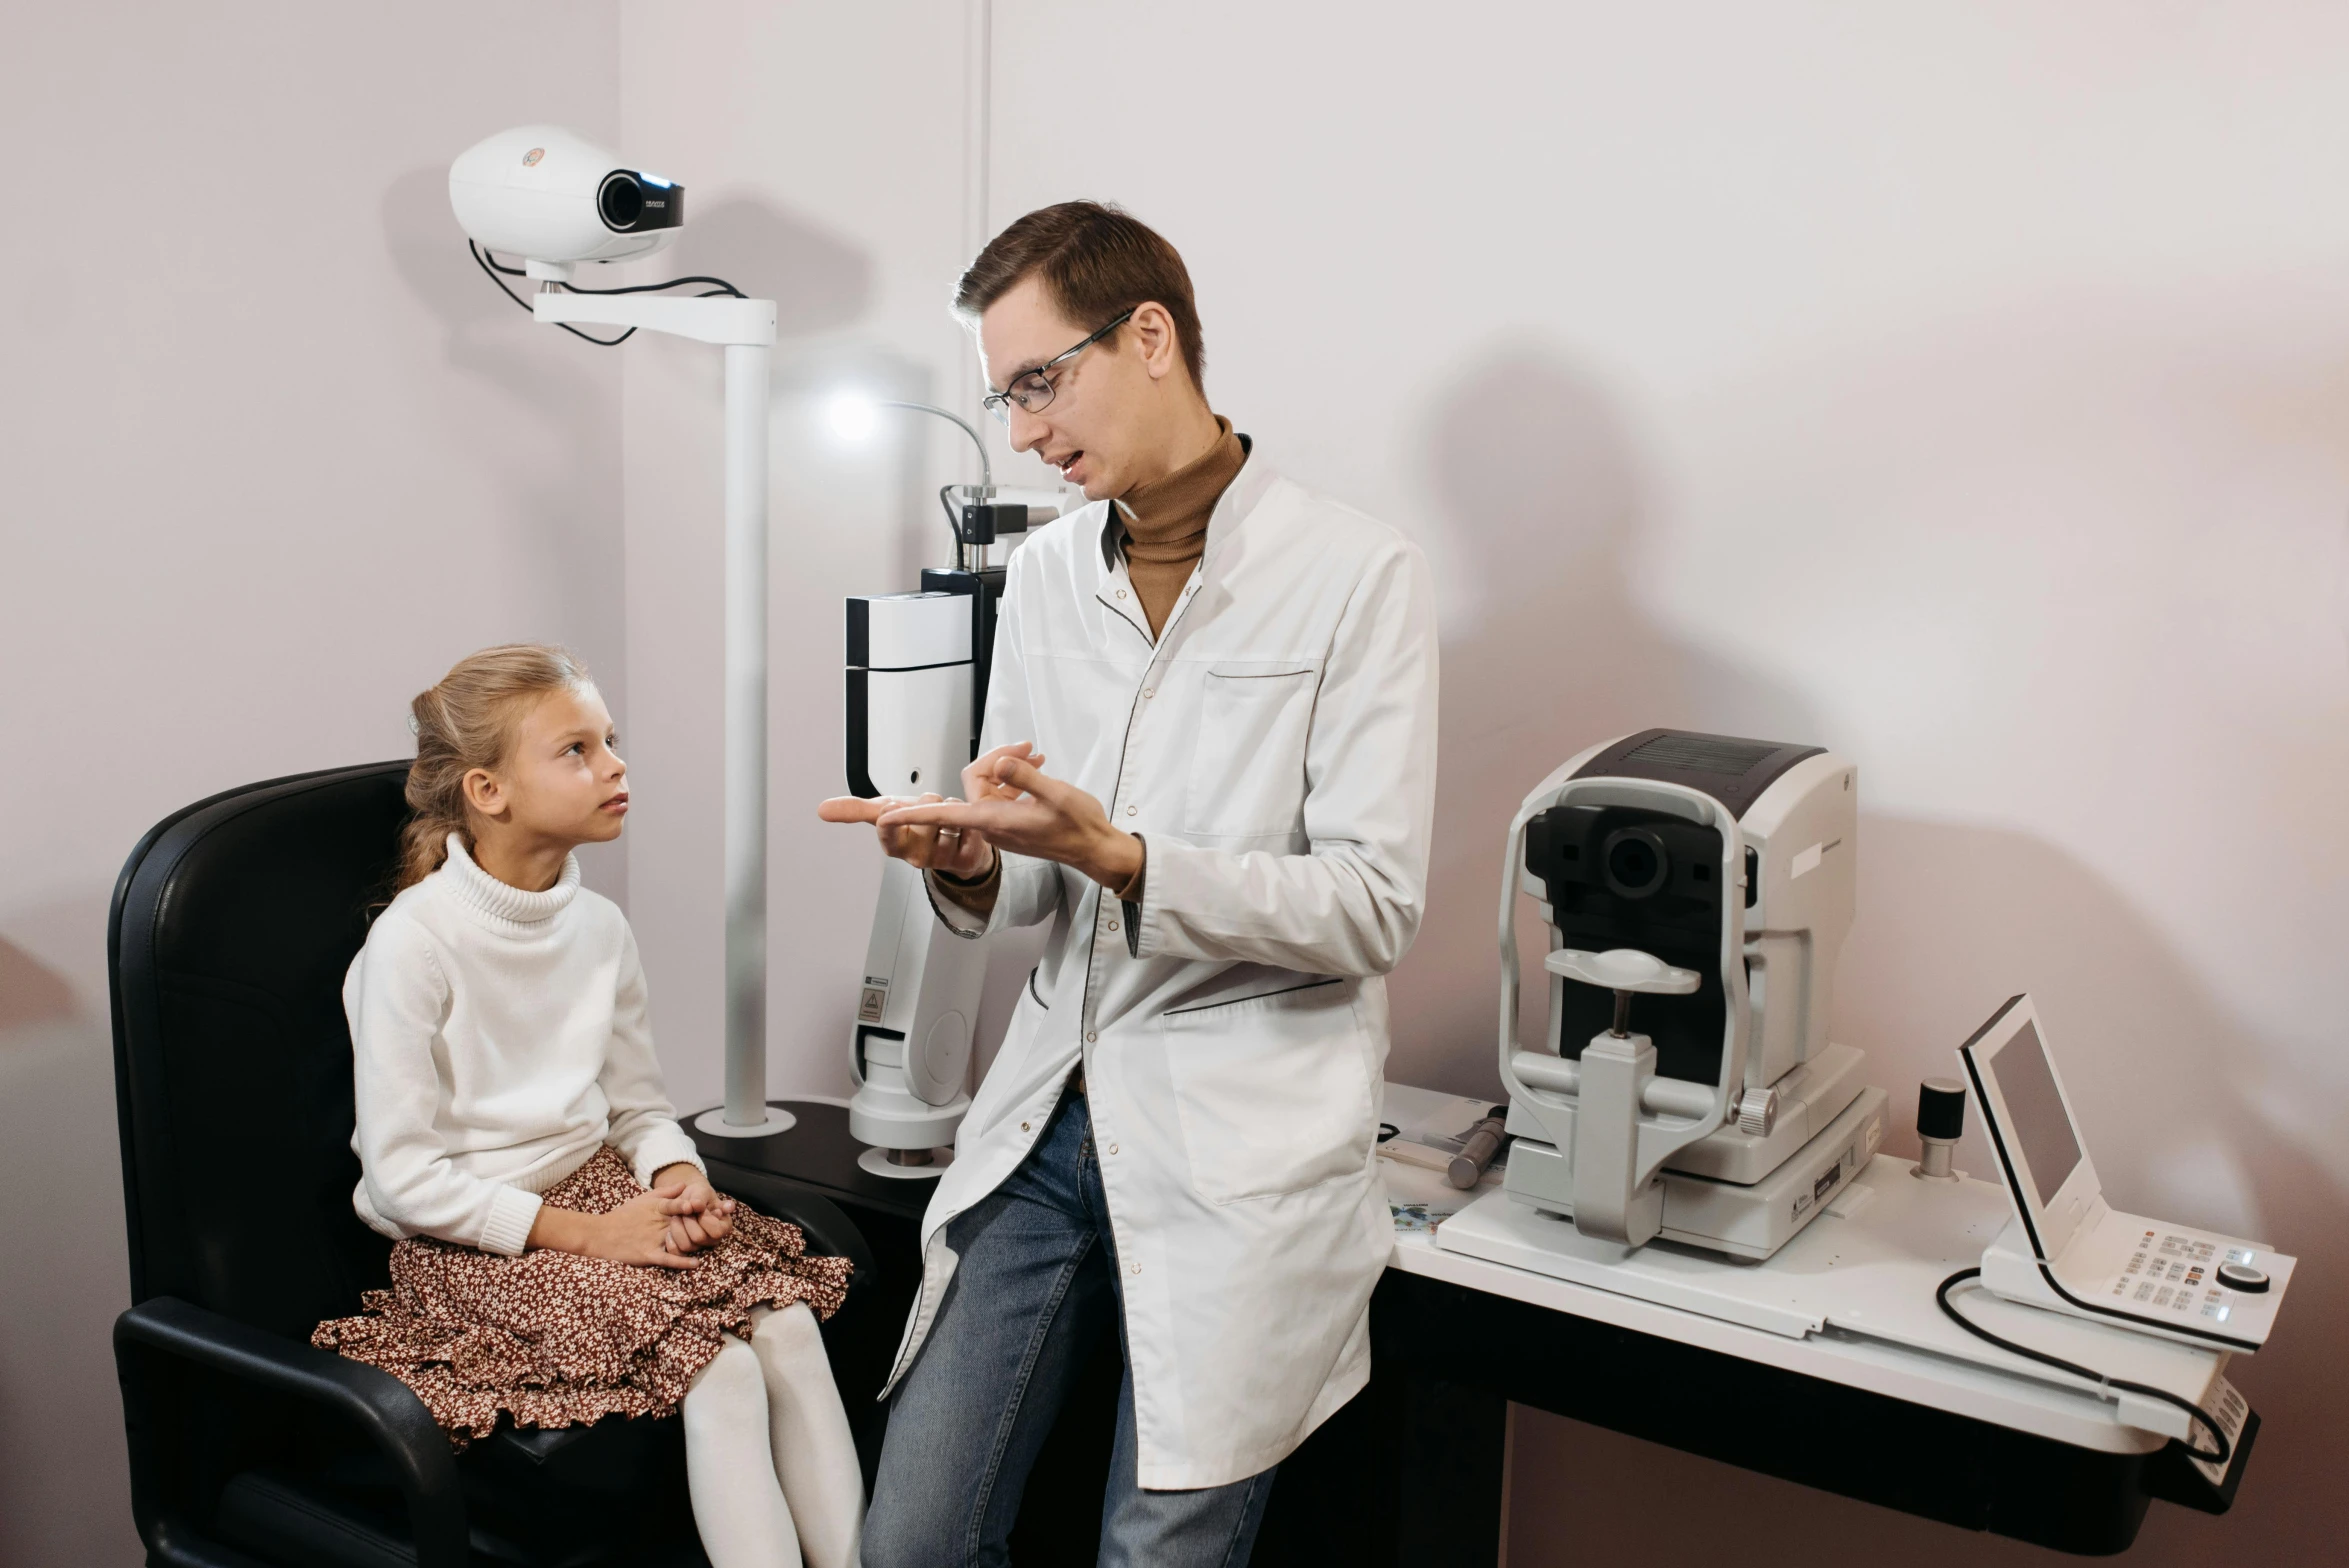 a man standing next to a little girl in a chair, by Adam Marczyński, pexels contest winner, wearing lab coat and glasses, robotic eye, doctors office, neo kyiv